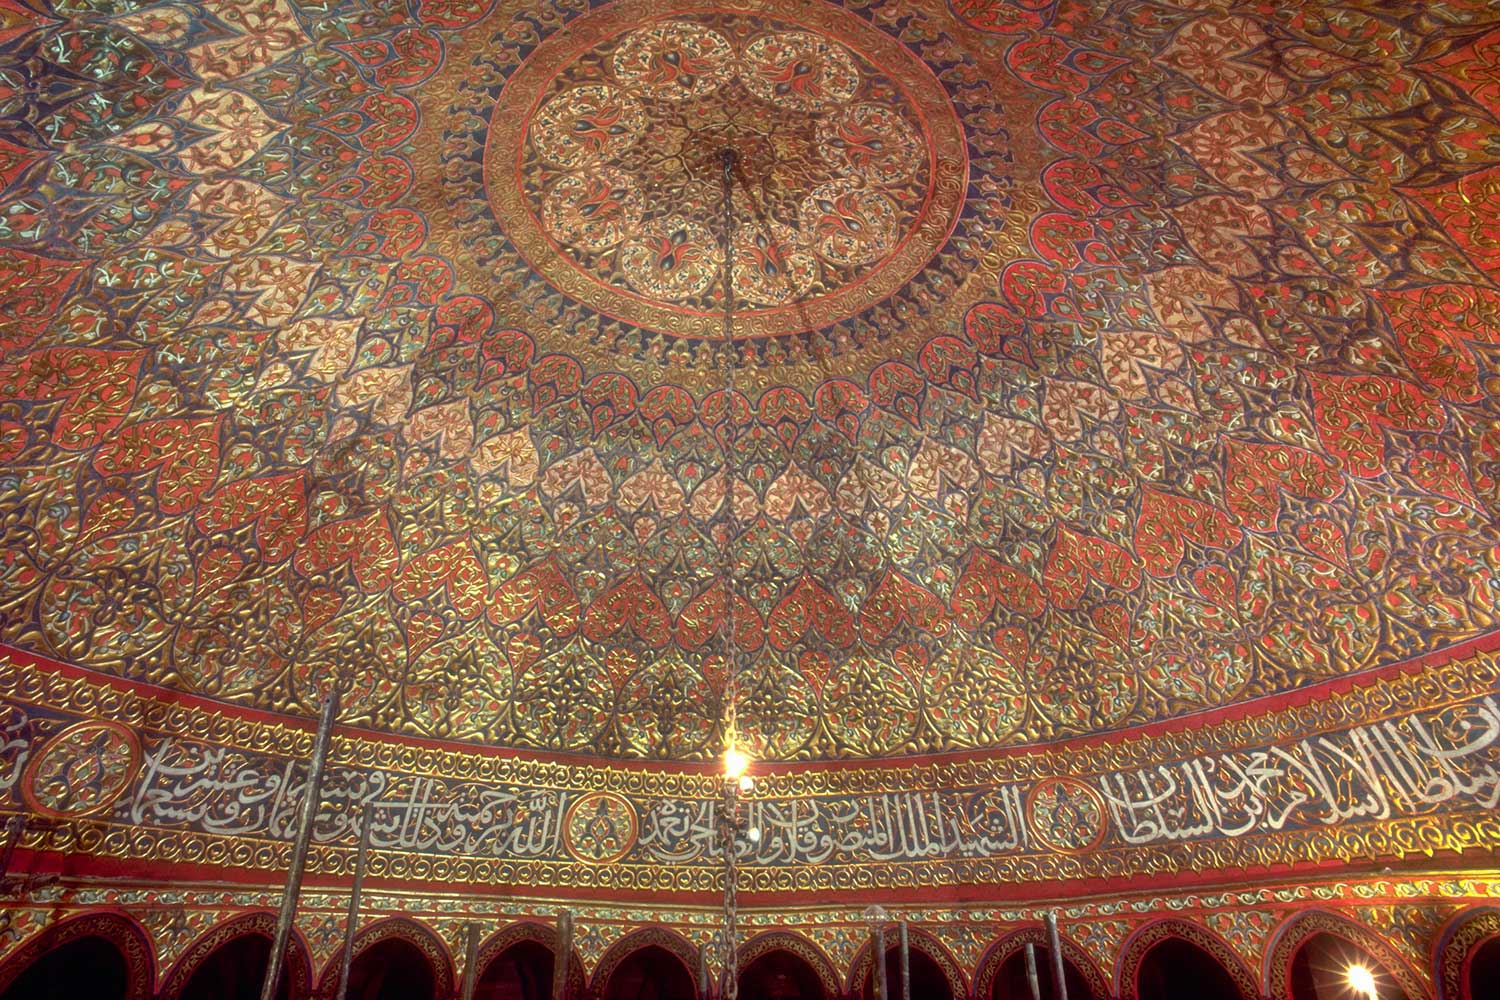 Aqsa Mosque Restoration - Underside of the restored dome showing mosiac work